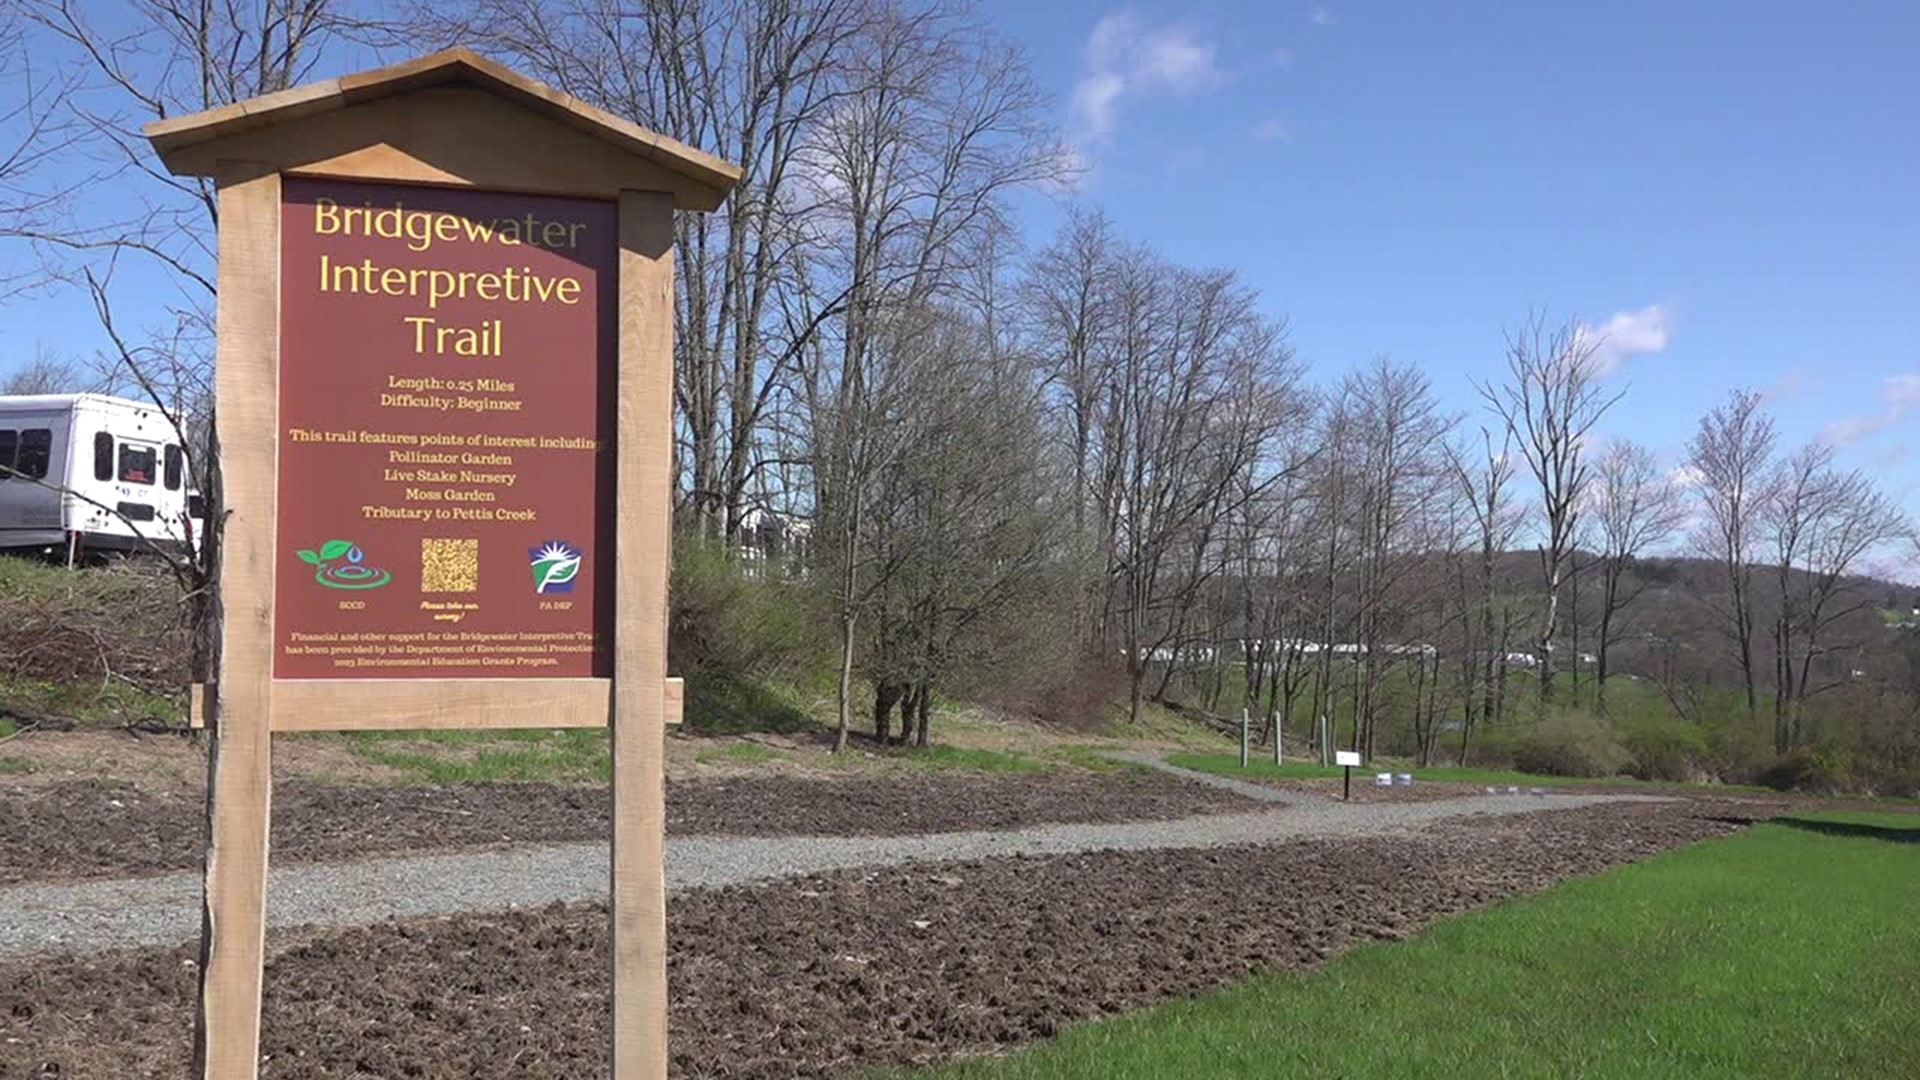 The Bridgewater Interpretive Trail was unveiled Monday by the Susquehanna County Conservation District.